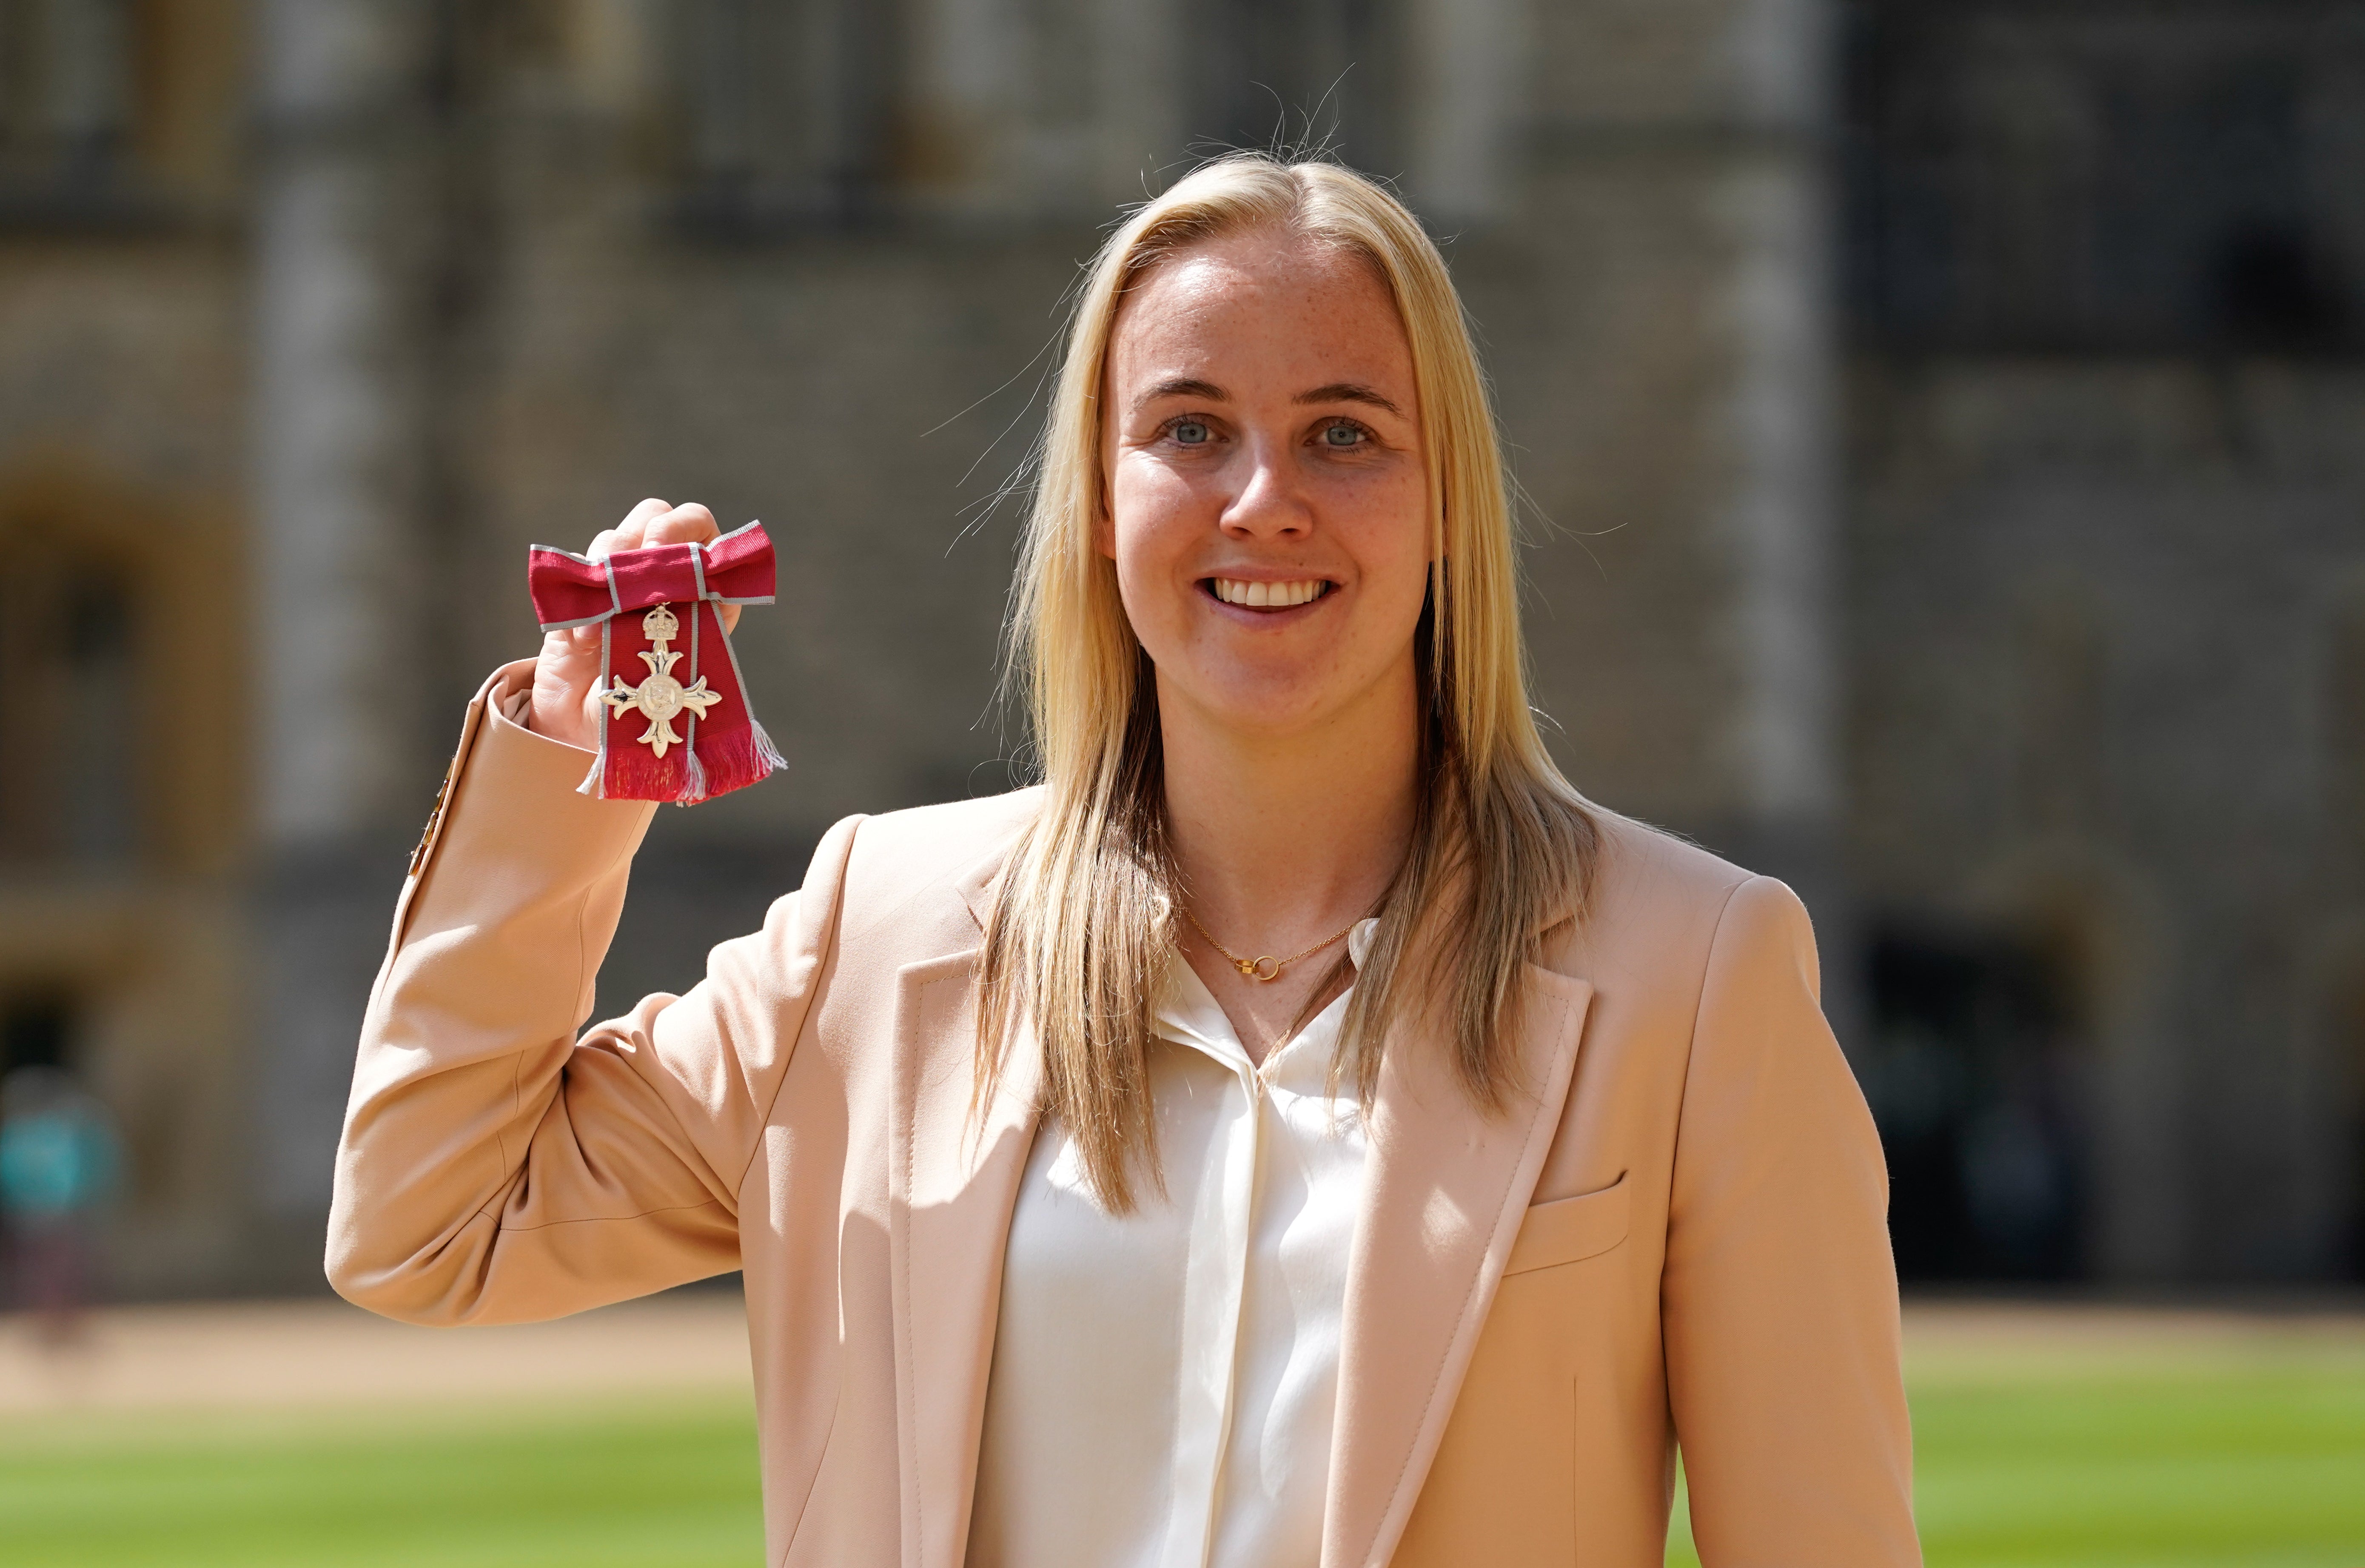 Beth Mead poses after being made a Member of the Order of the British Empire (MBE) by the Prince of Wales, for services to football after winning the 2022 European Championship with England